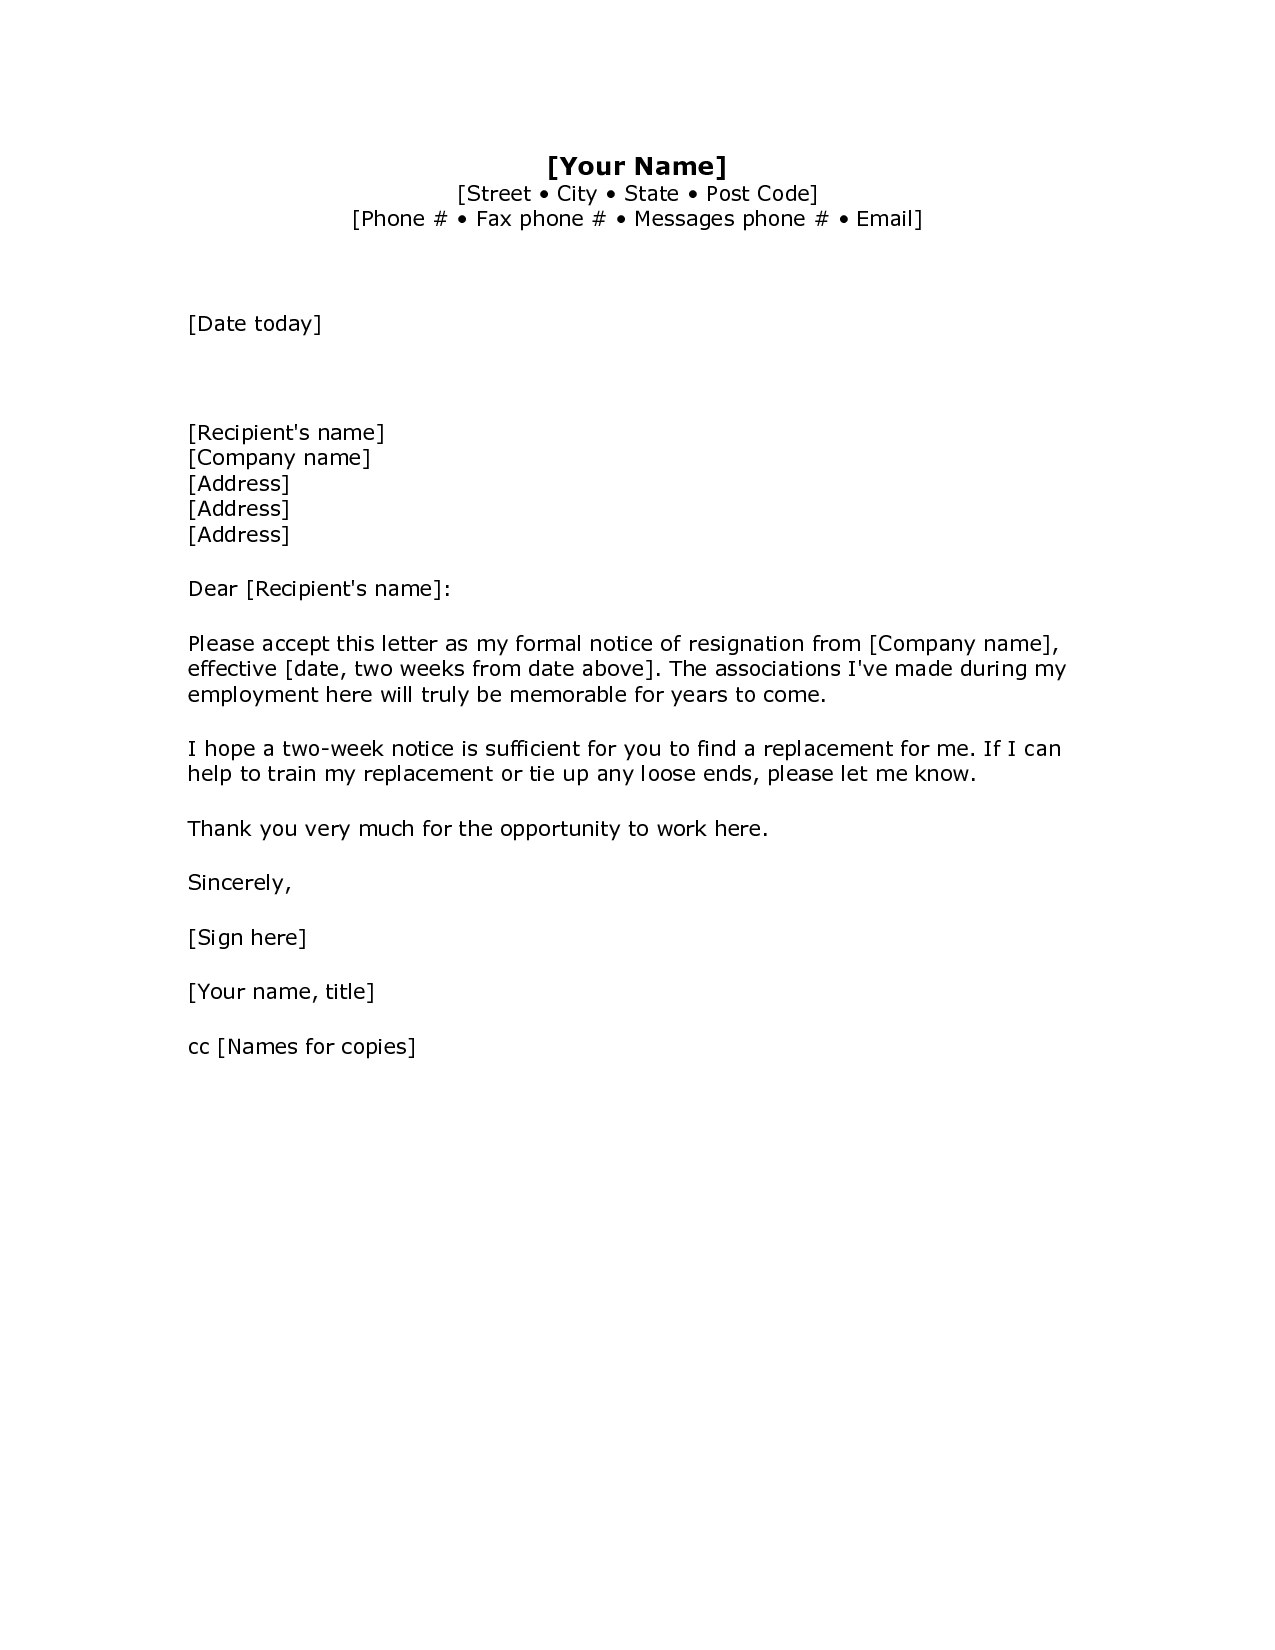 Standard Resignation Letter Template Word Examples  Letter Cover within Standard Resignation Letter Template